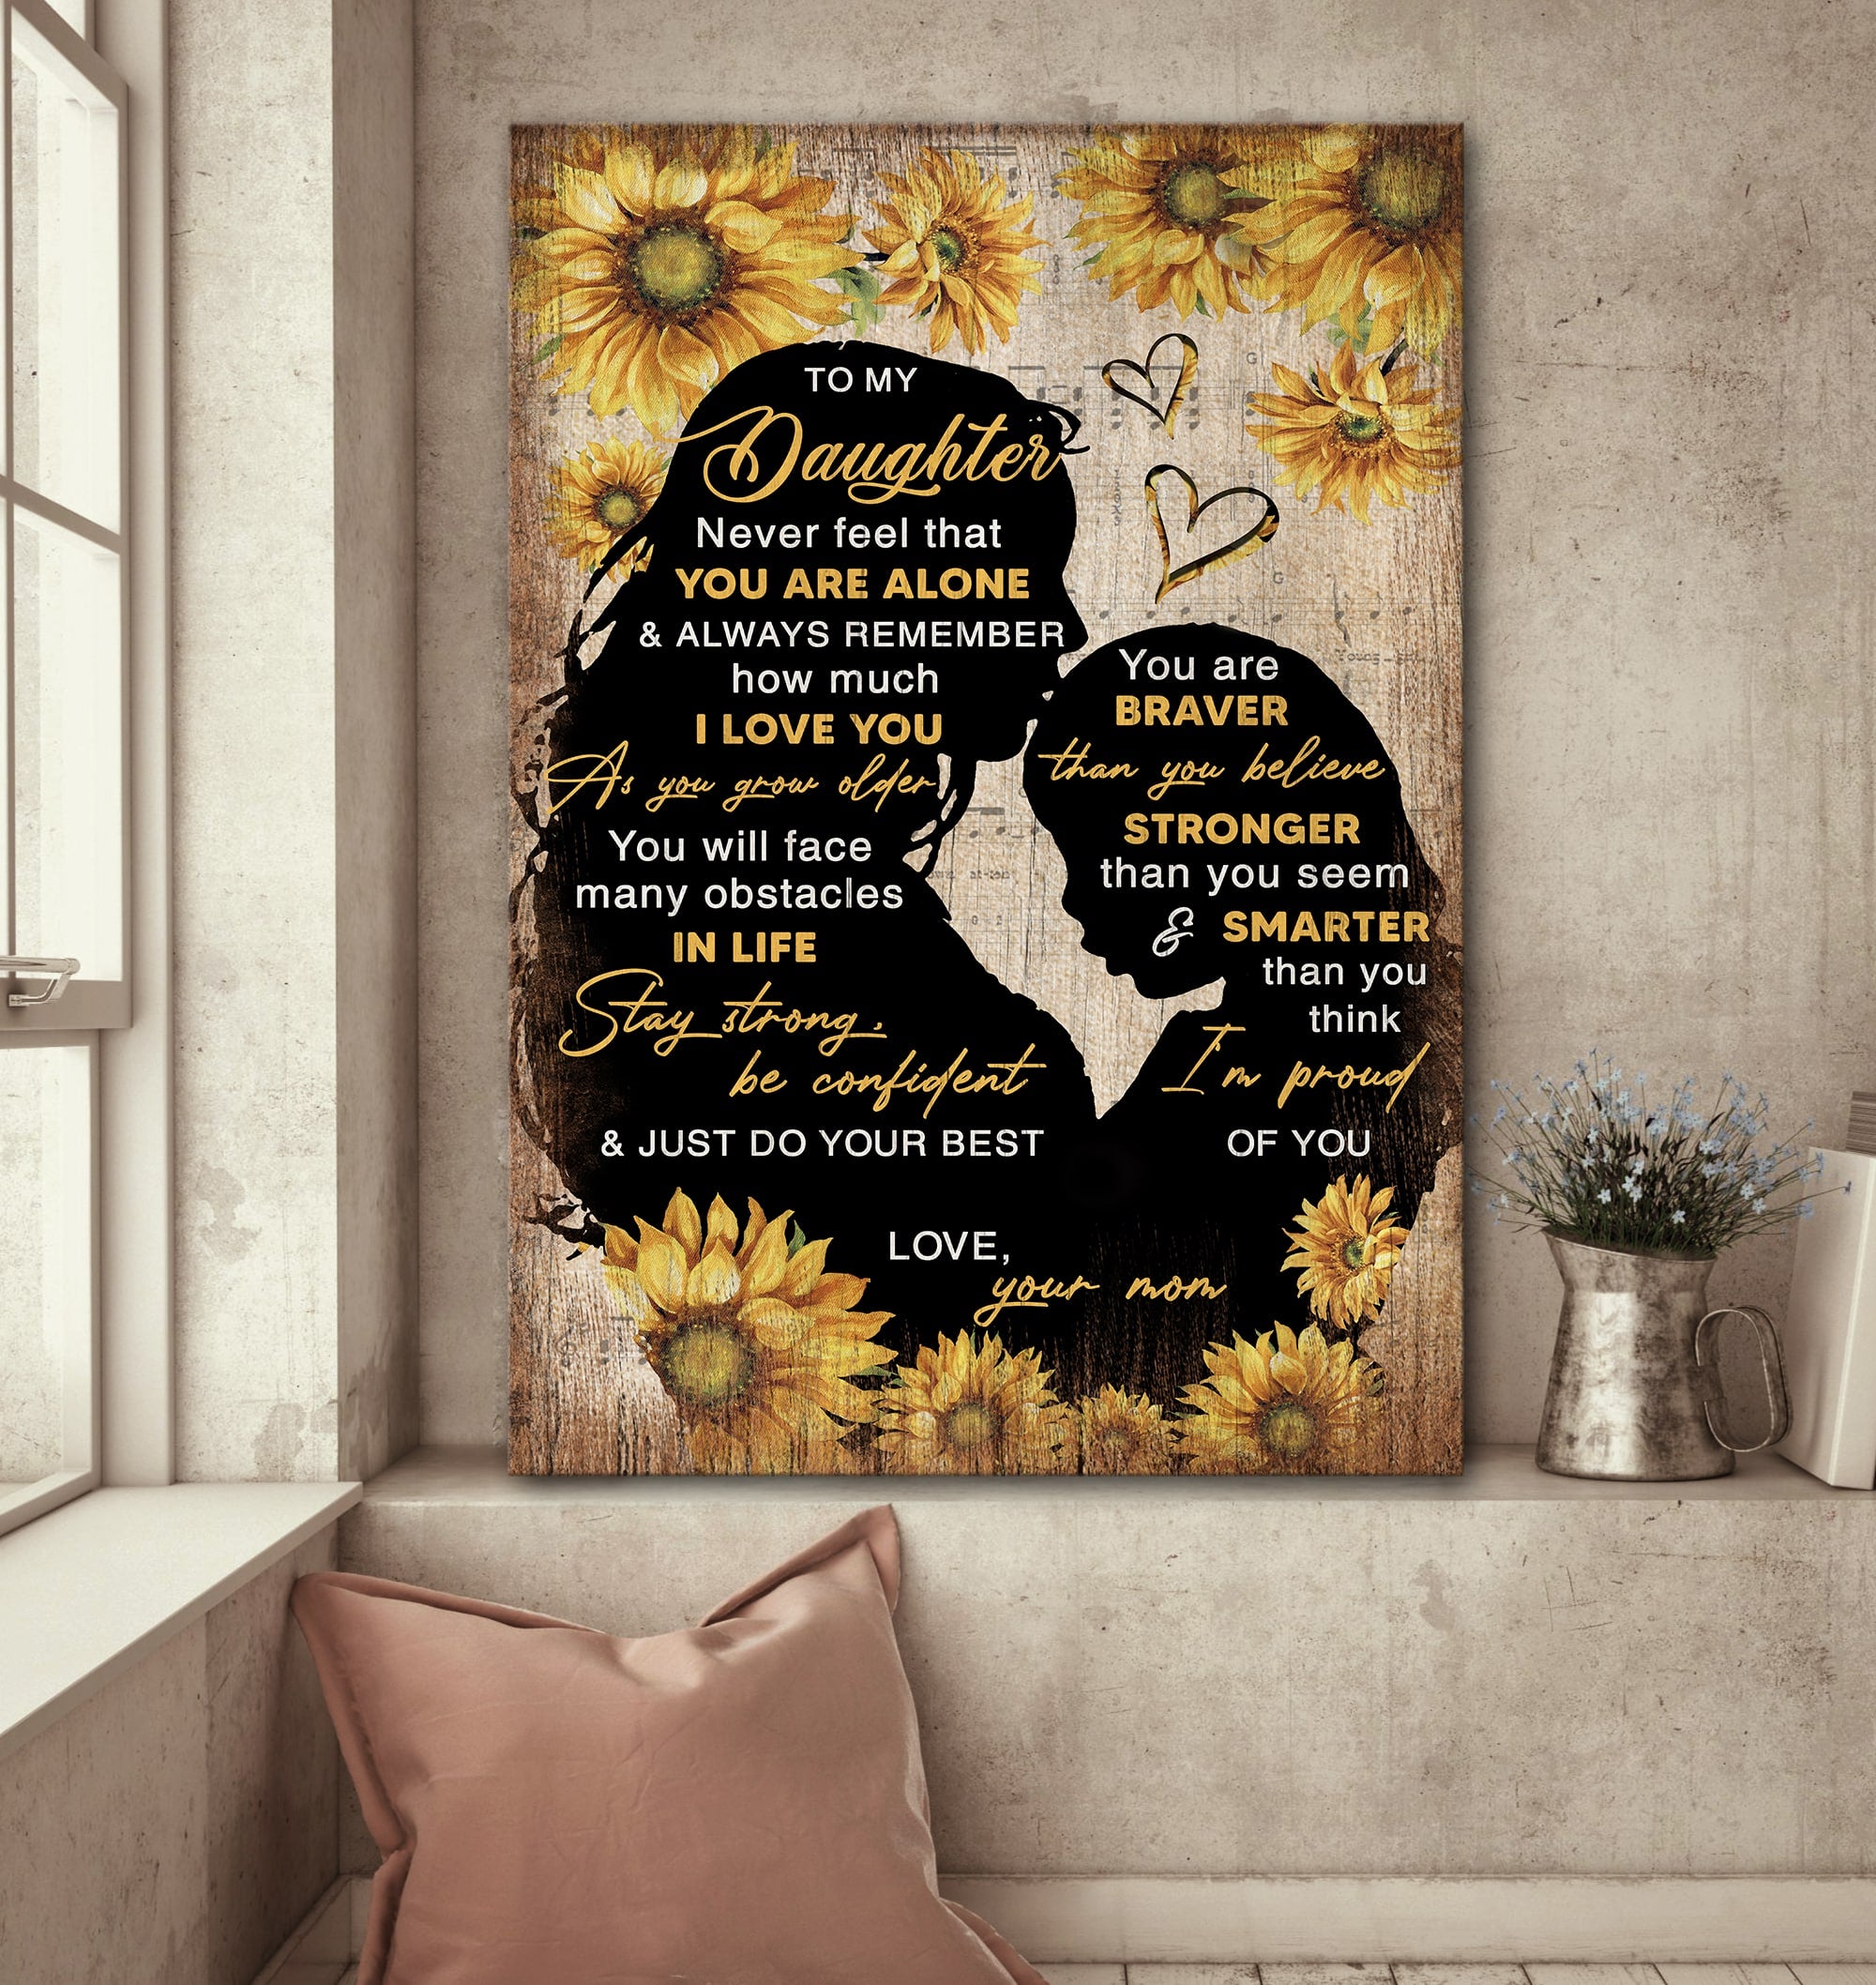 Mom To Daughter, Sunflower, Mom and daughter, Shadow, Stay strong Be confident and do your best - Family Portrait Canvas Prints, Wall Art